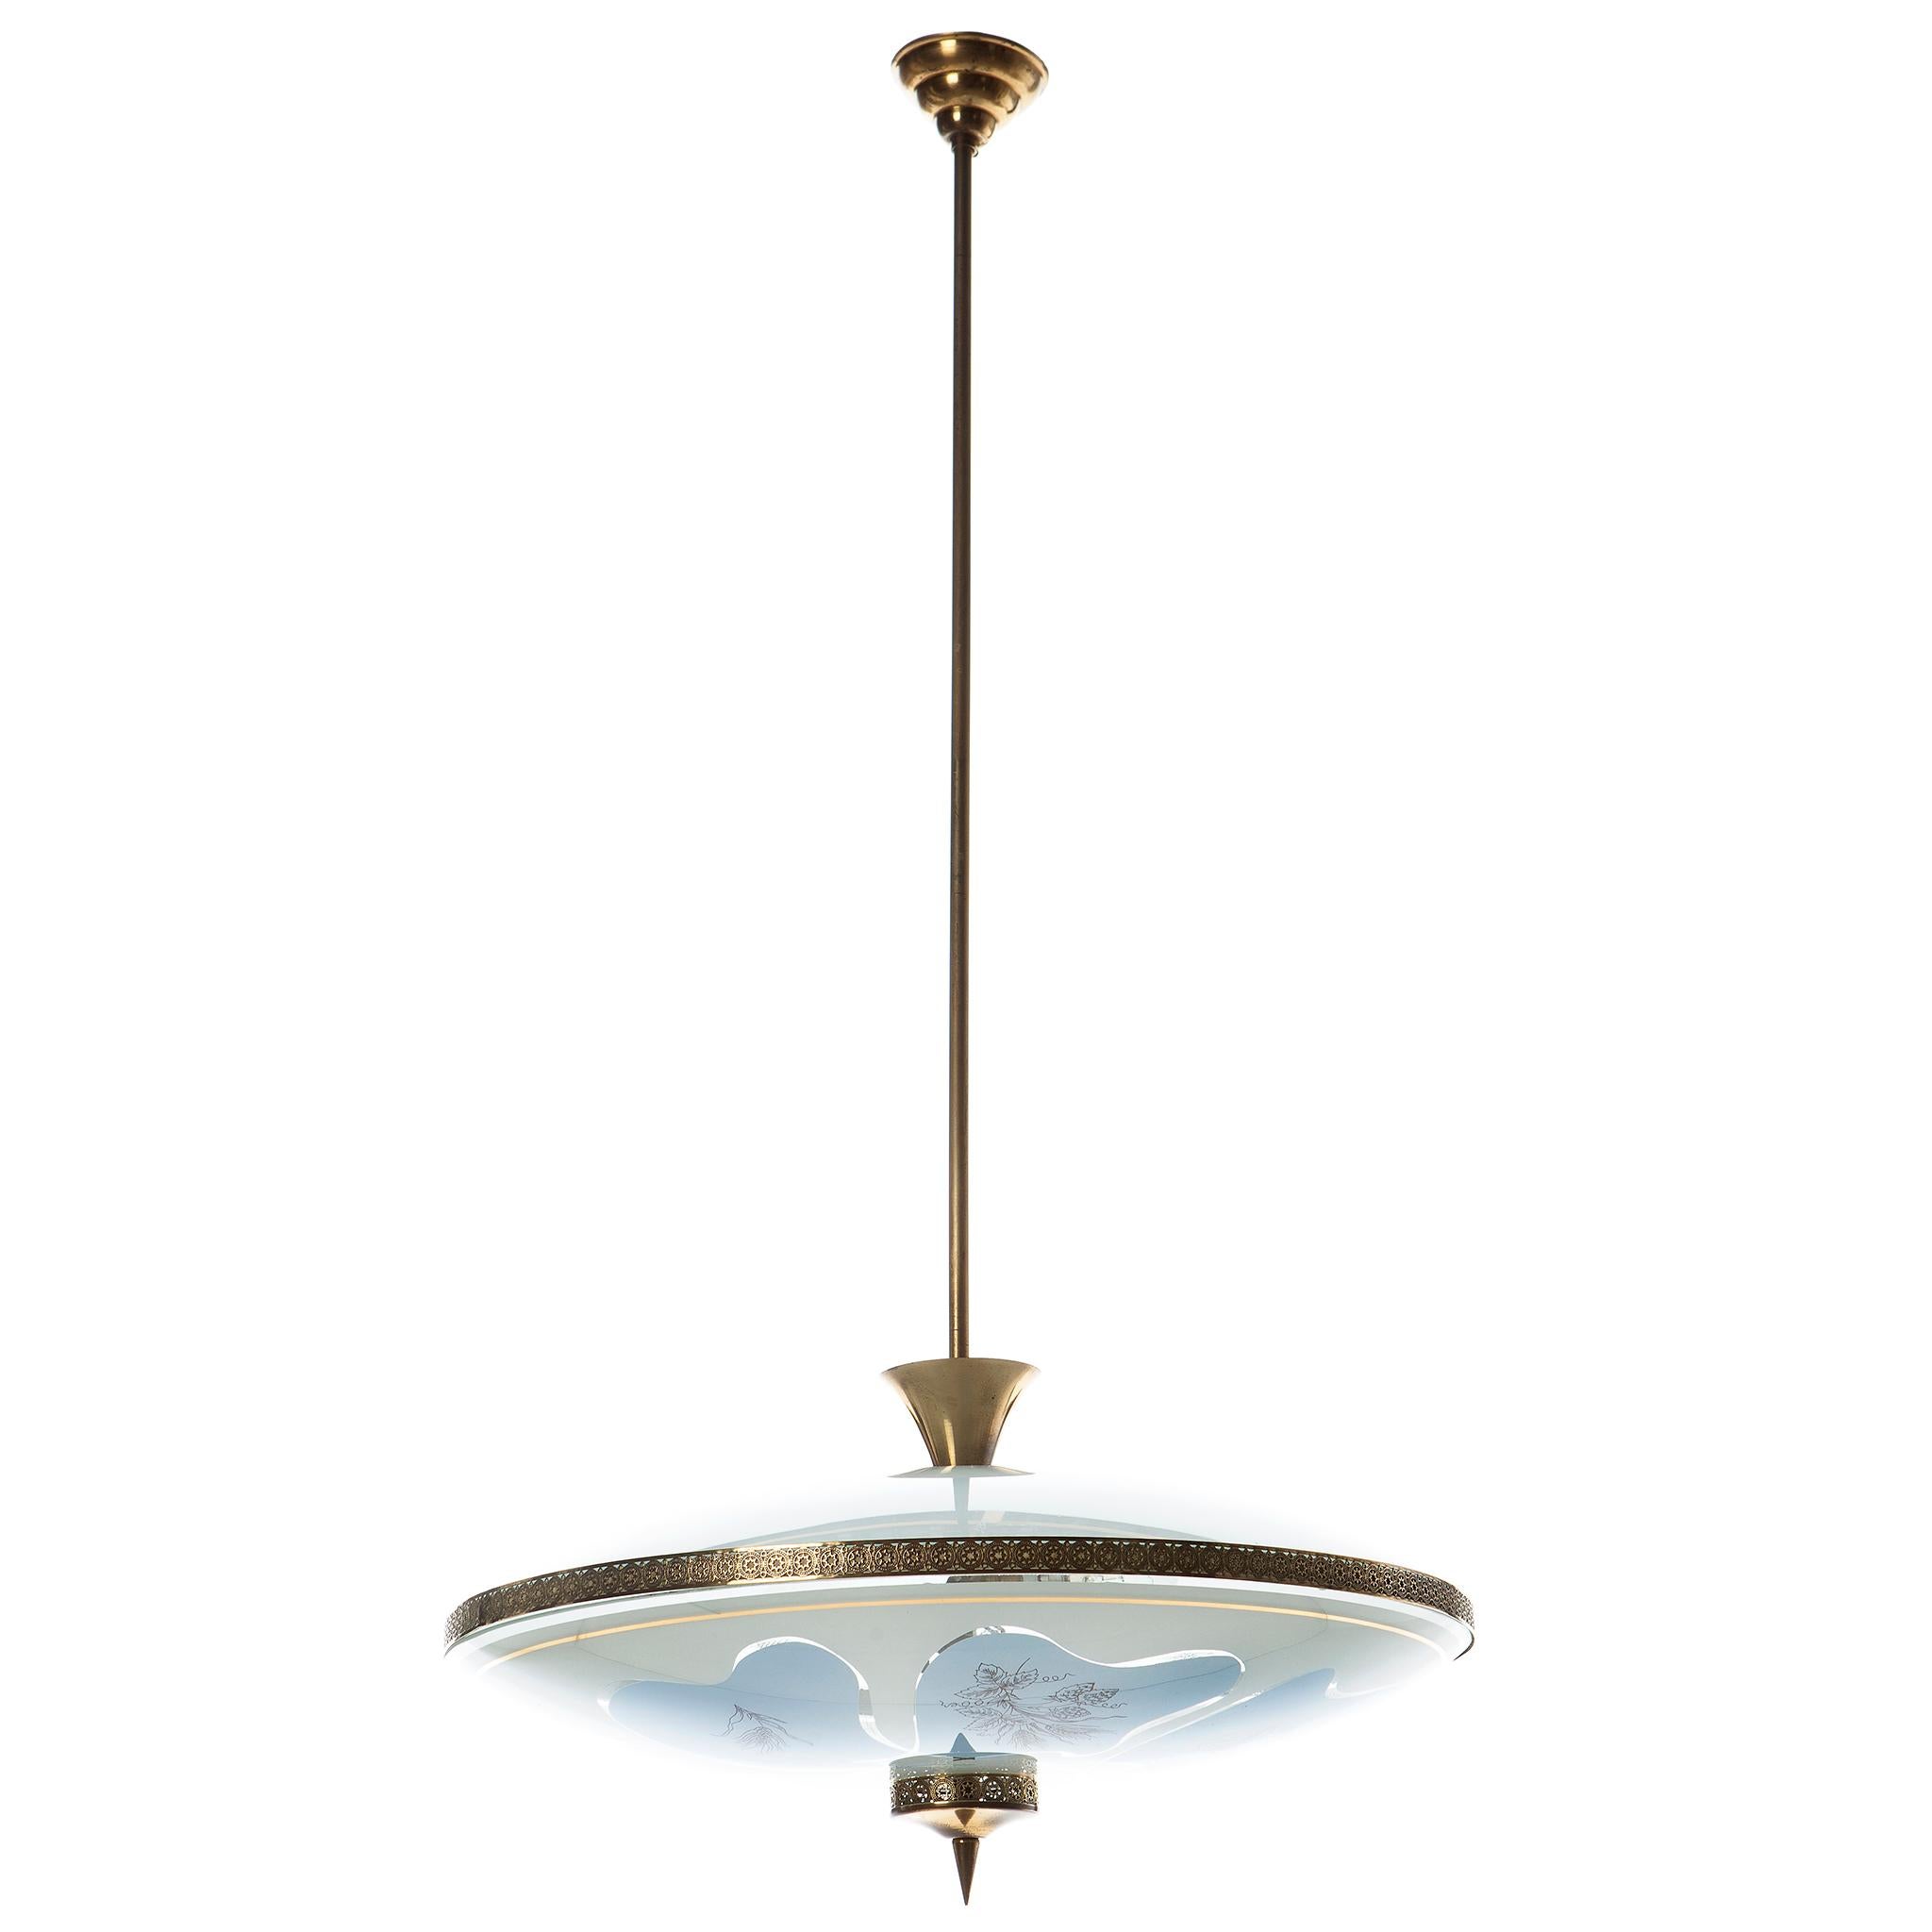 This elegant piece consisting of a brass frame and 2 unique frosted and satin glass reflector/saucers. 
The lower round curved glass reflector with 6 grain harvest motifs and a gold-colored ring mounts below a round satin blue glass reflector.